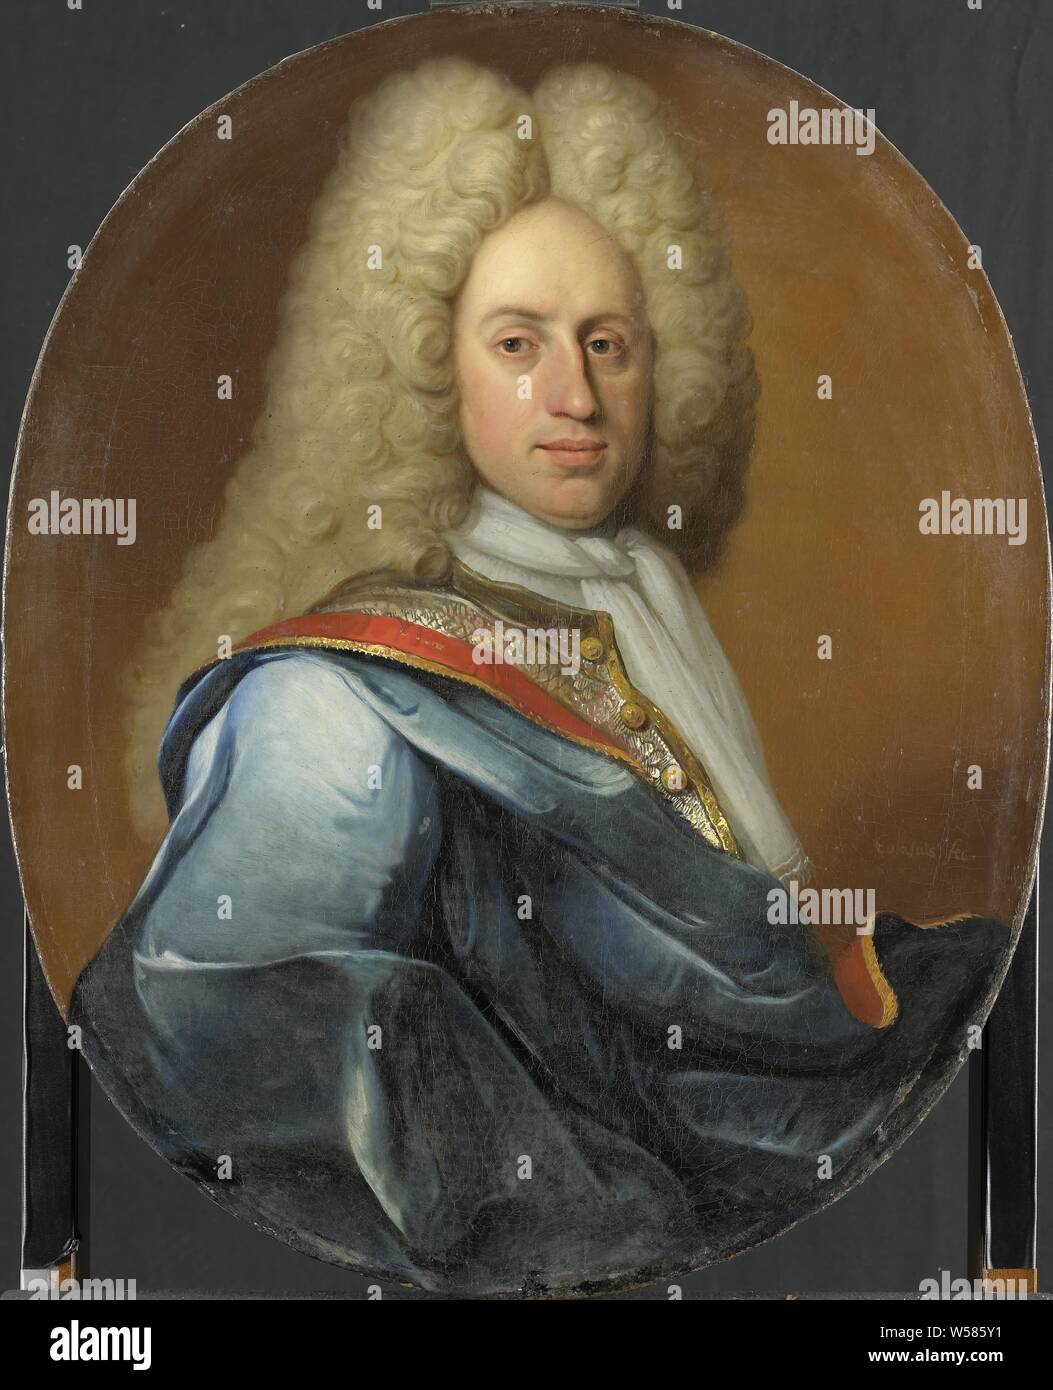 Hieronymus Josephus Boudaen, Lord of St Laurens and Popkensburg, Portrait of Hieronymus Josephus Boudaen, lord of St Laurens and Popkensburg. Bust, with a long white wig, historical persons, Johan George Collasius (mentioned on object), 1700 - 1750, canvas, oil paint (paint), h 77 cm × w 64 cm d 8 cm Stock Photo